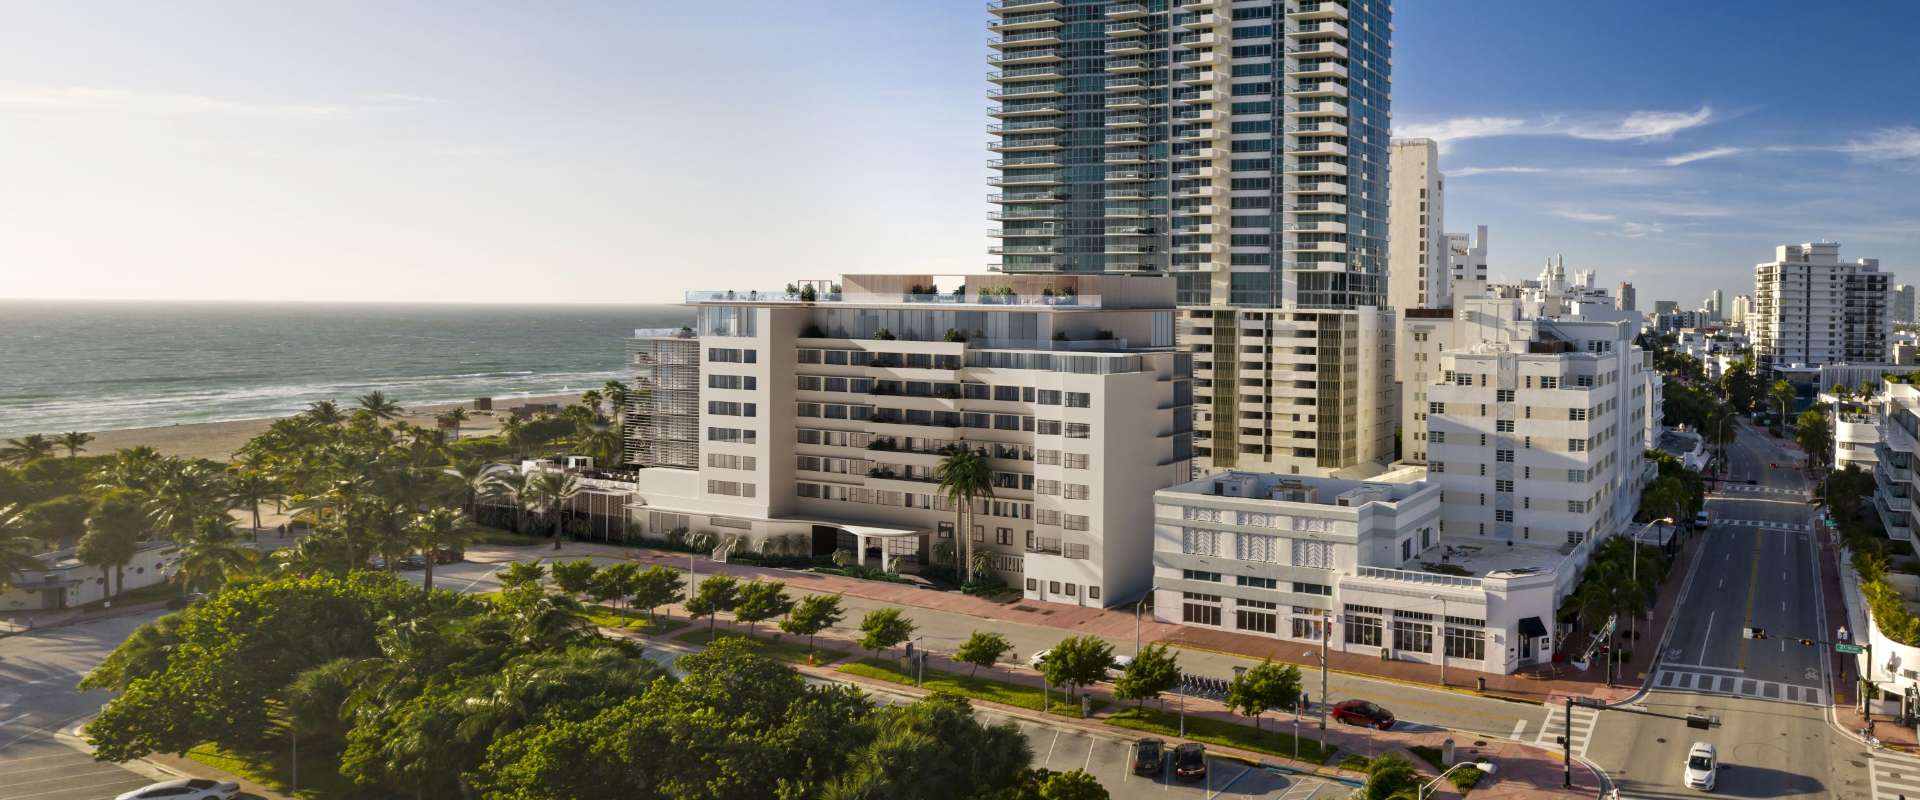 Bulgari Hotels to open first US property in Miami Beach